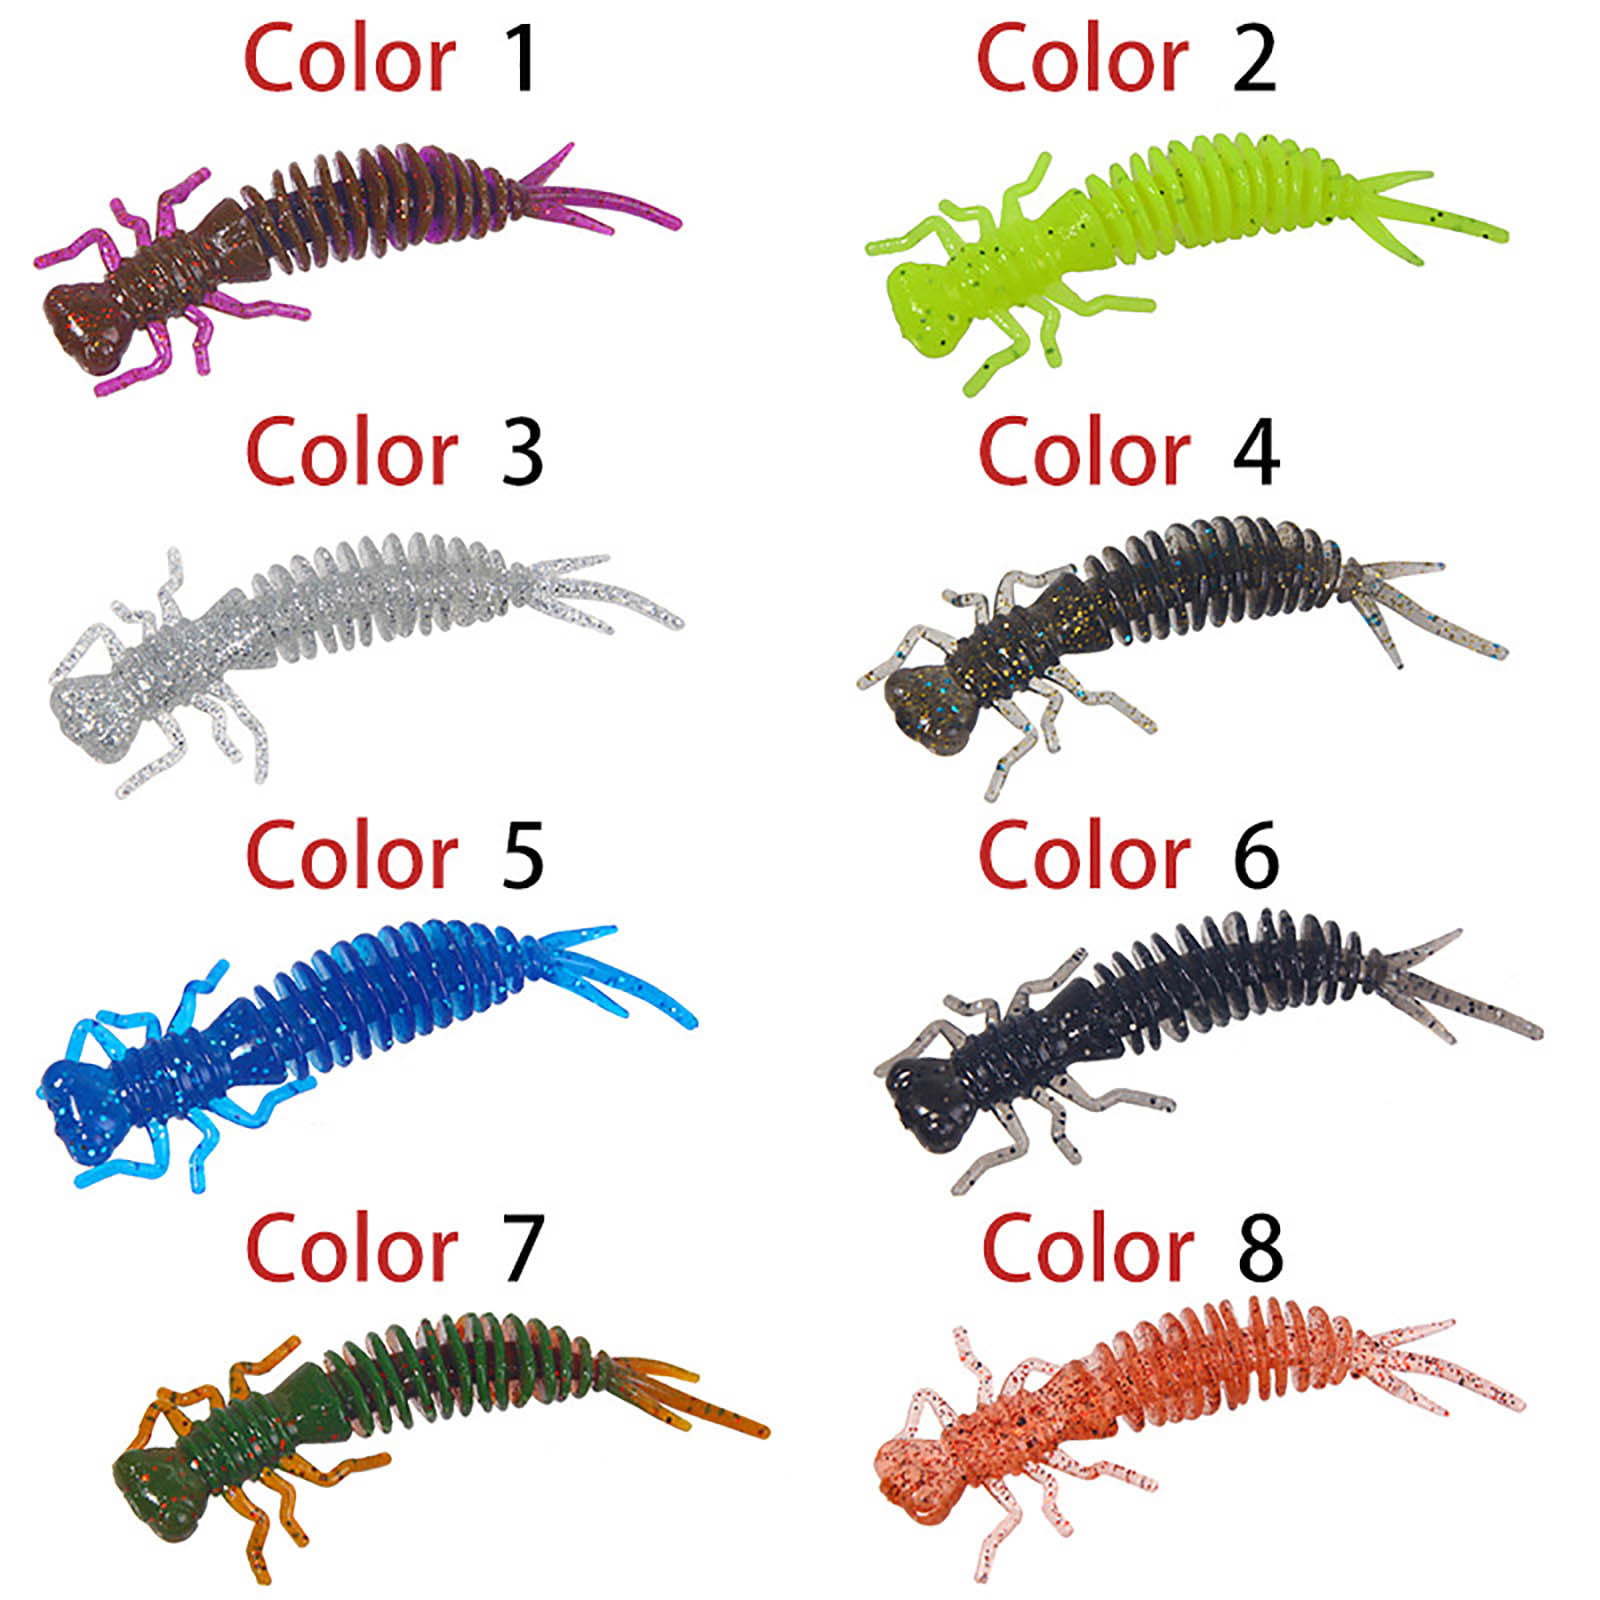 SDJMa 10 Pcs 2.1 Paddle Tail Swimbaits Worms Soft Silicone Fishing Lures  for Bass, Trout, Crappie, Bionic Bug Soft Fishing Lure Saltwater Freshwater  Fishing 